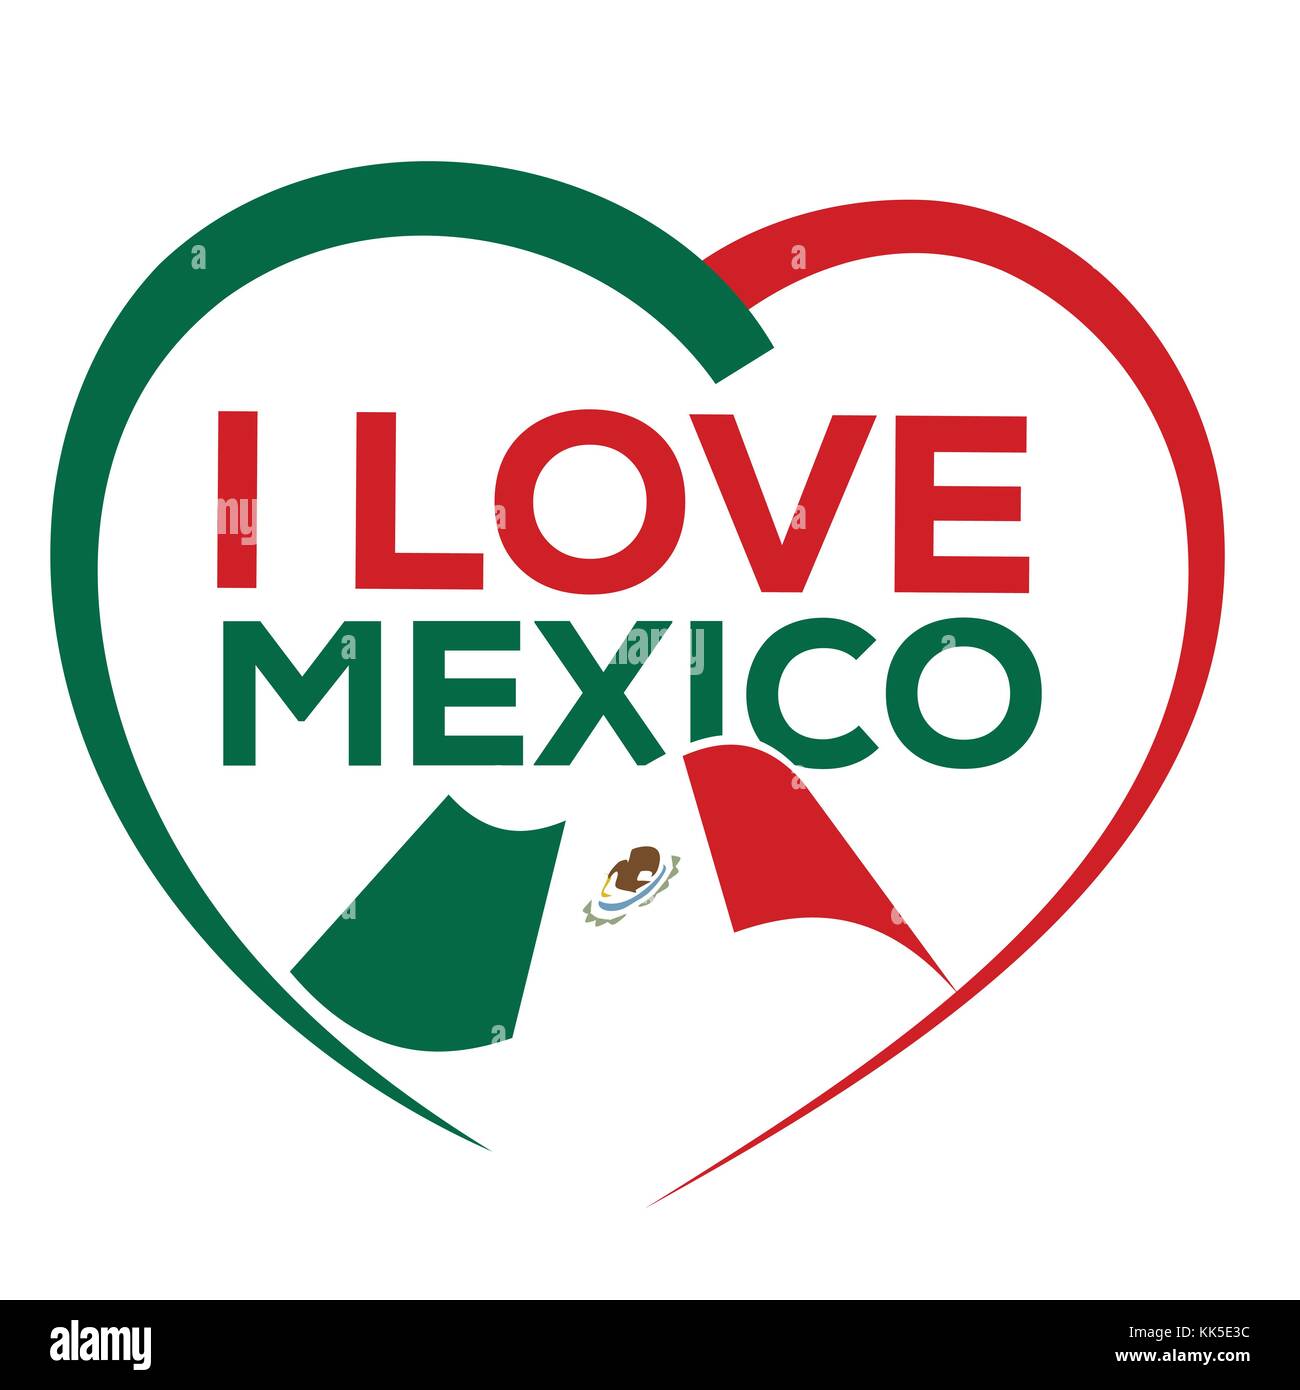 I love mexico with outline of heart and flag of mexico, icon design, isolated on white background. Stock Vector